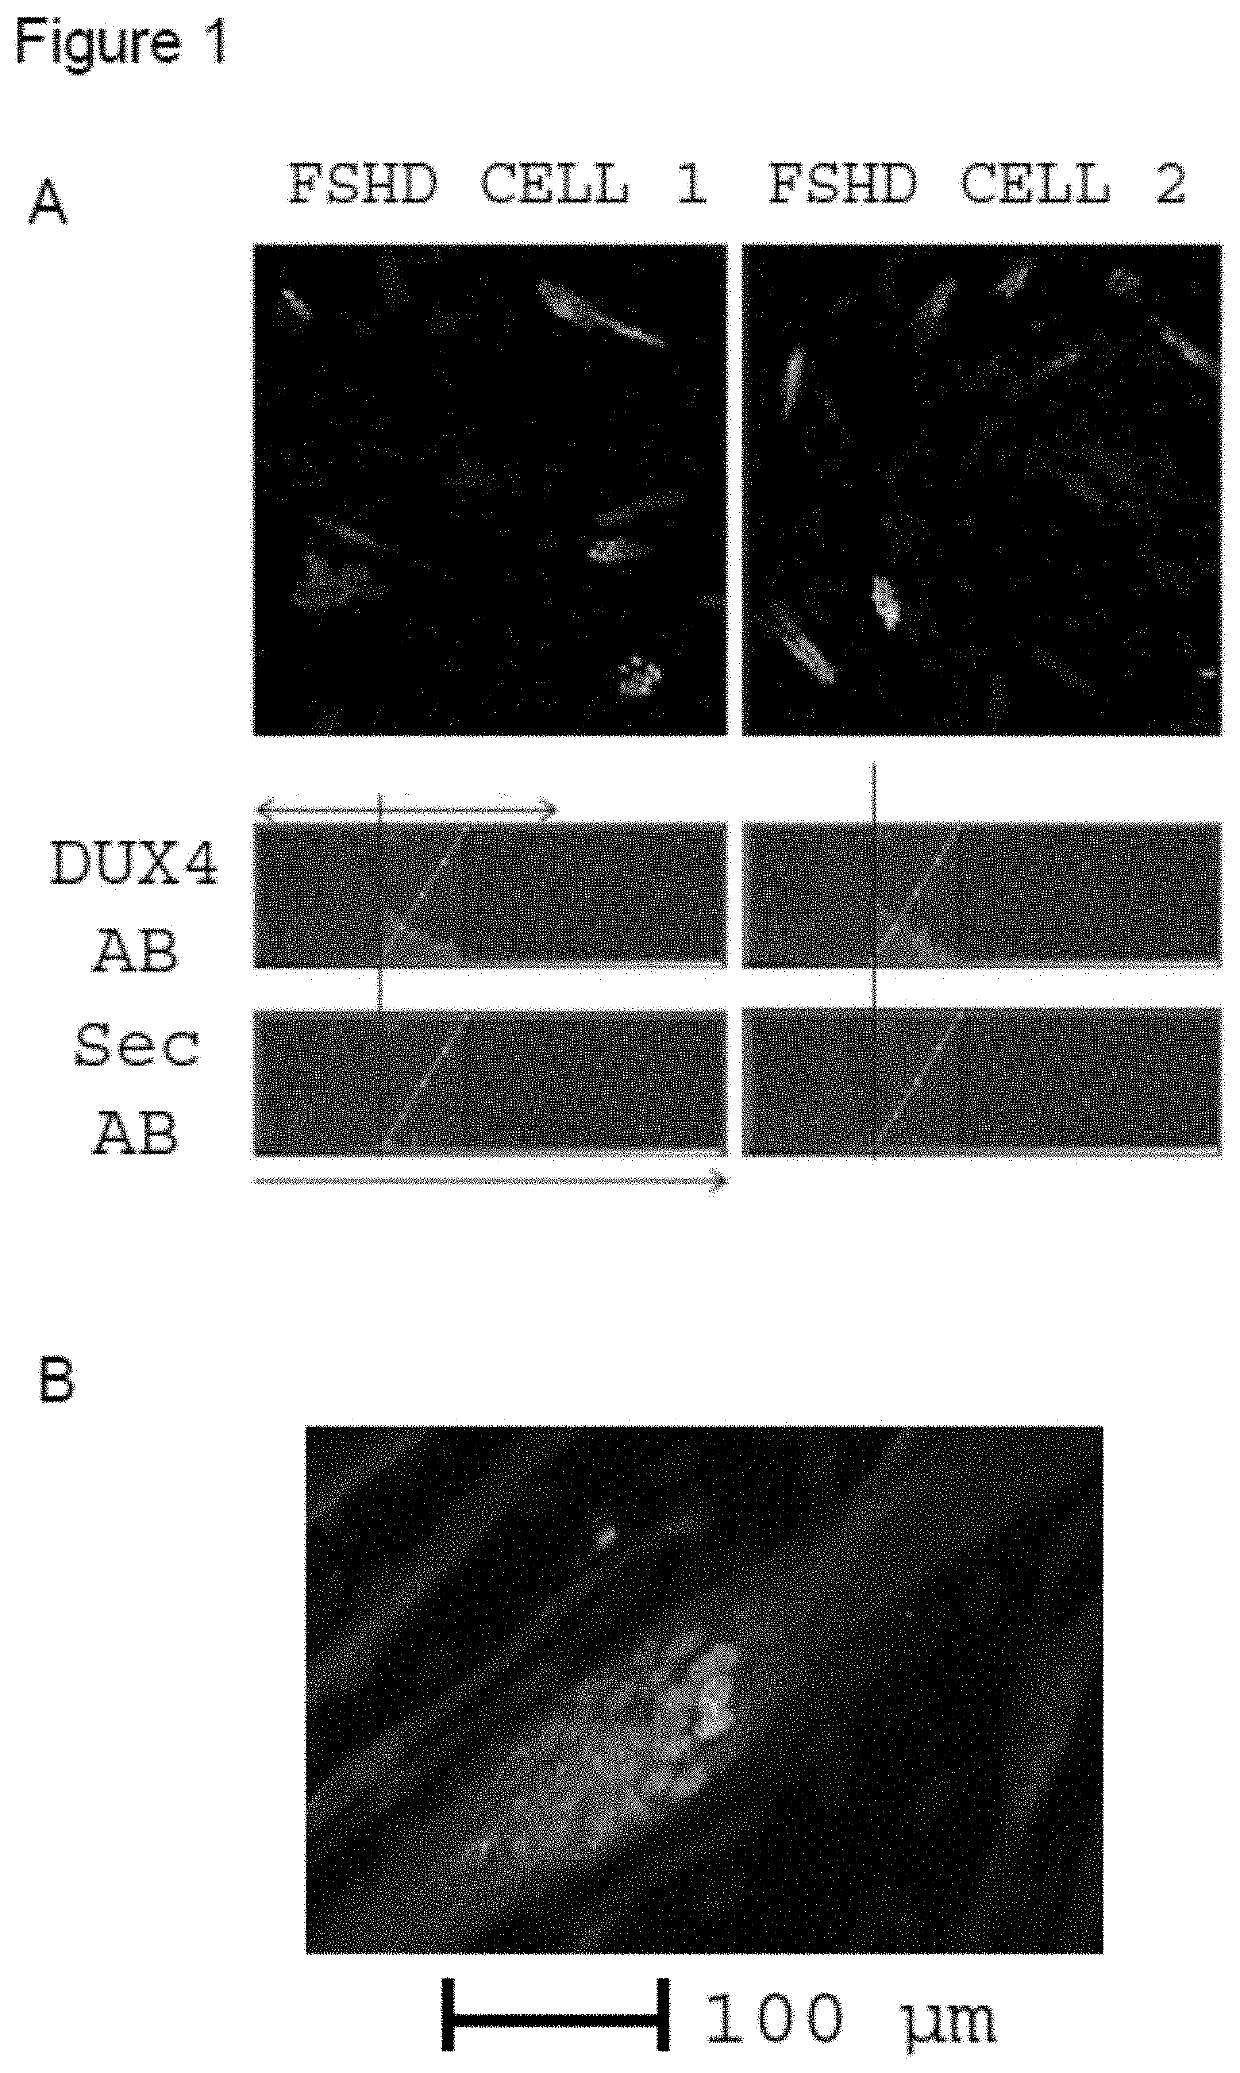 Casein kinase 1 inhibitors for use in the treatment of diseases related to dux4 expression such as muscular dystrophy and cancer